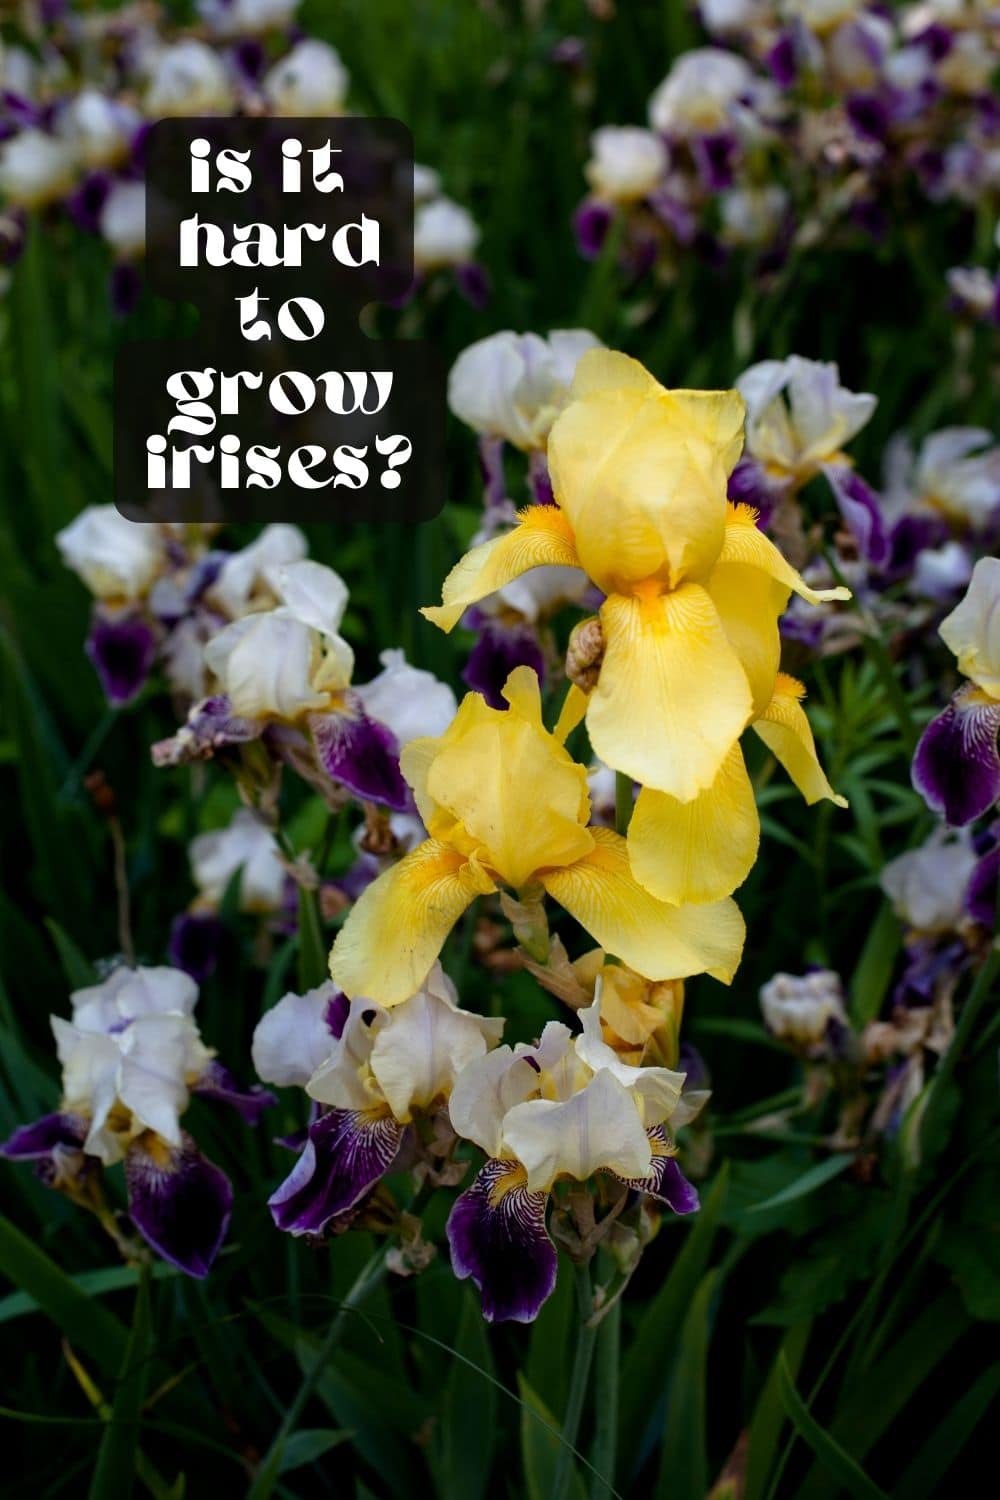 Are you looking for a beautiful and easy-to-grow flower? Irises may be the perfect choice for you! These stunning flowers come in various colors and sizes, making them a great addition to a home garden. However, there's more to irises than just aesthetics. There are many different types, each with unique characteristics and growing requirements.